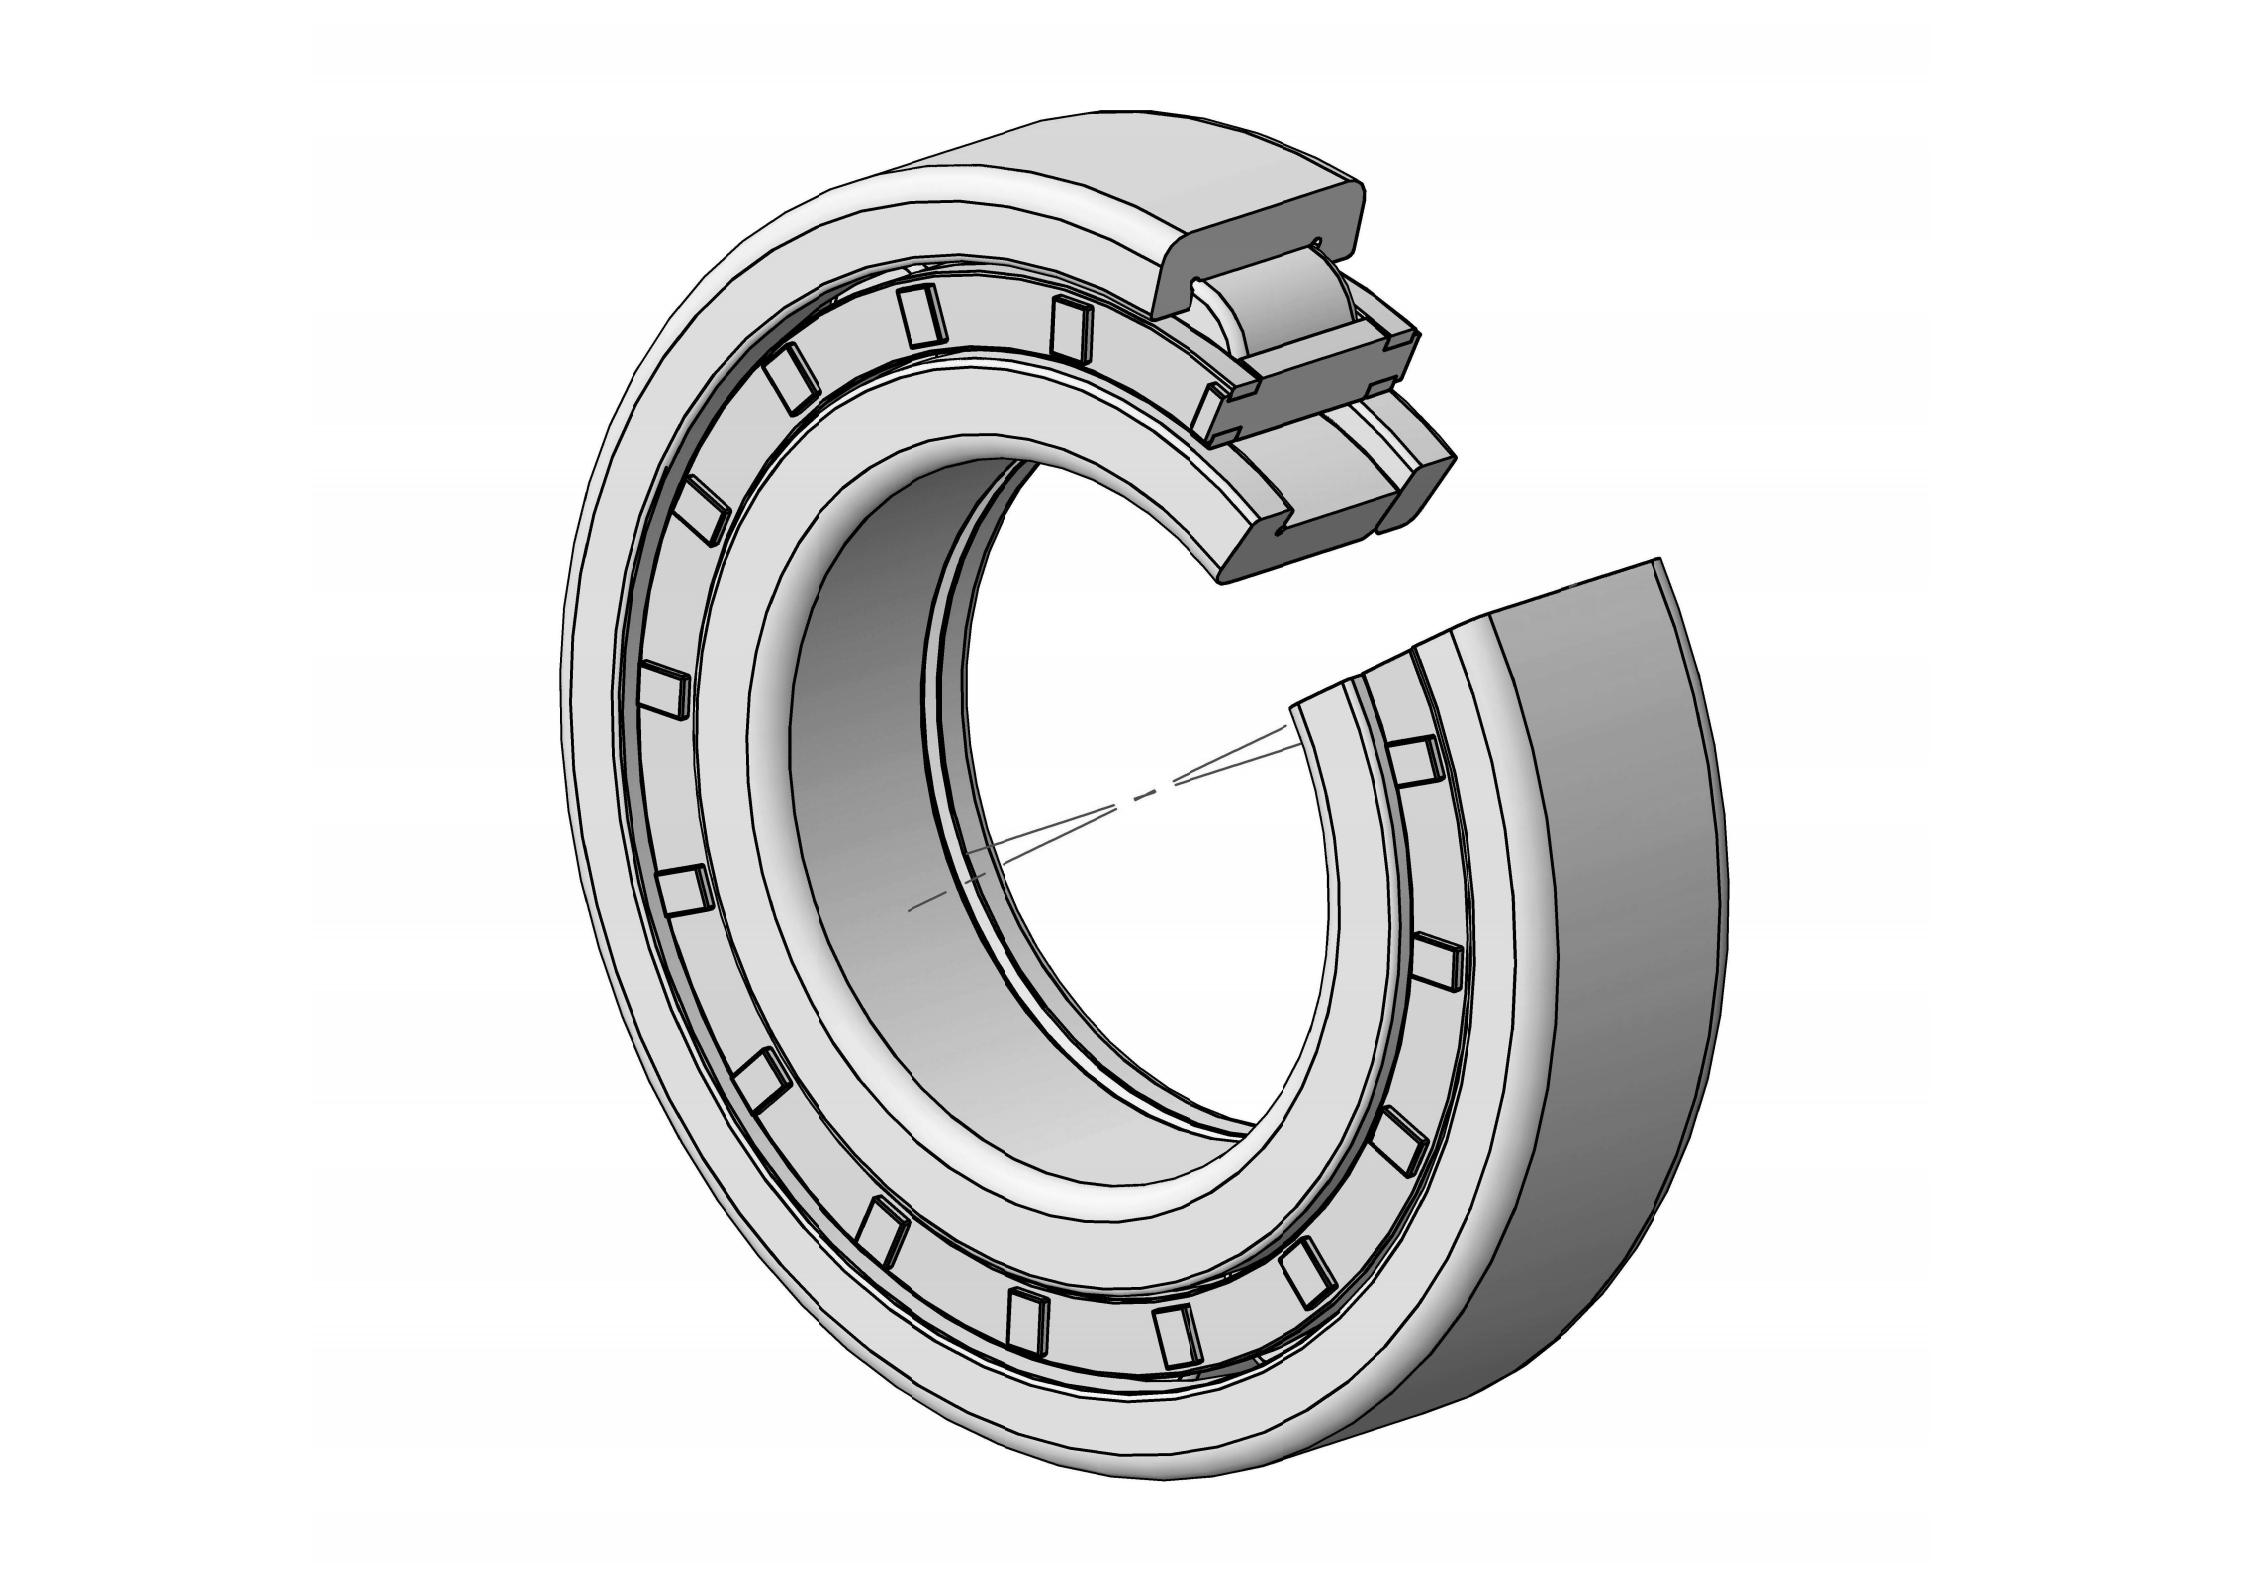 NUP2316-EM Single Row Cylindrical roller bearing 